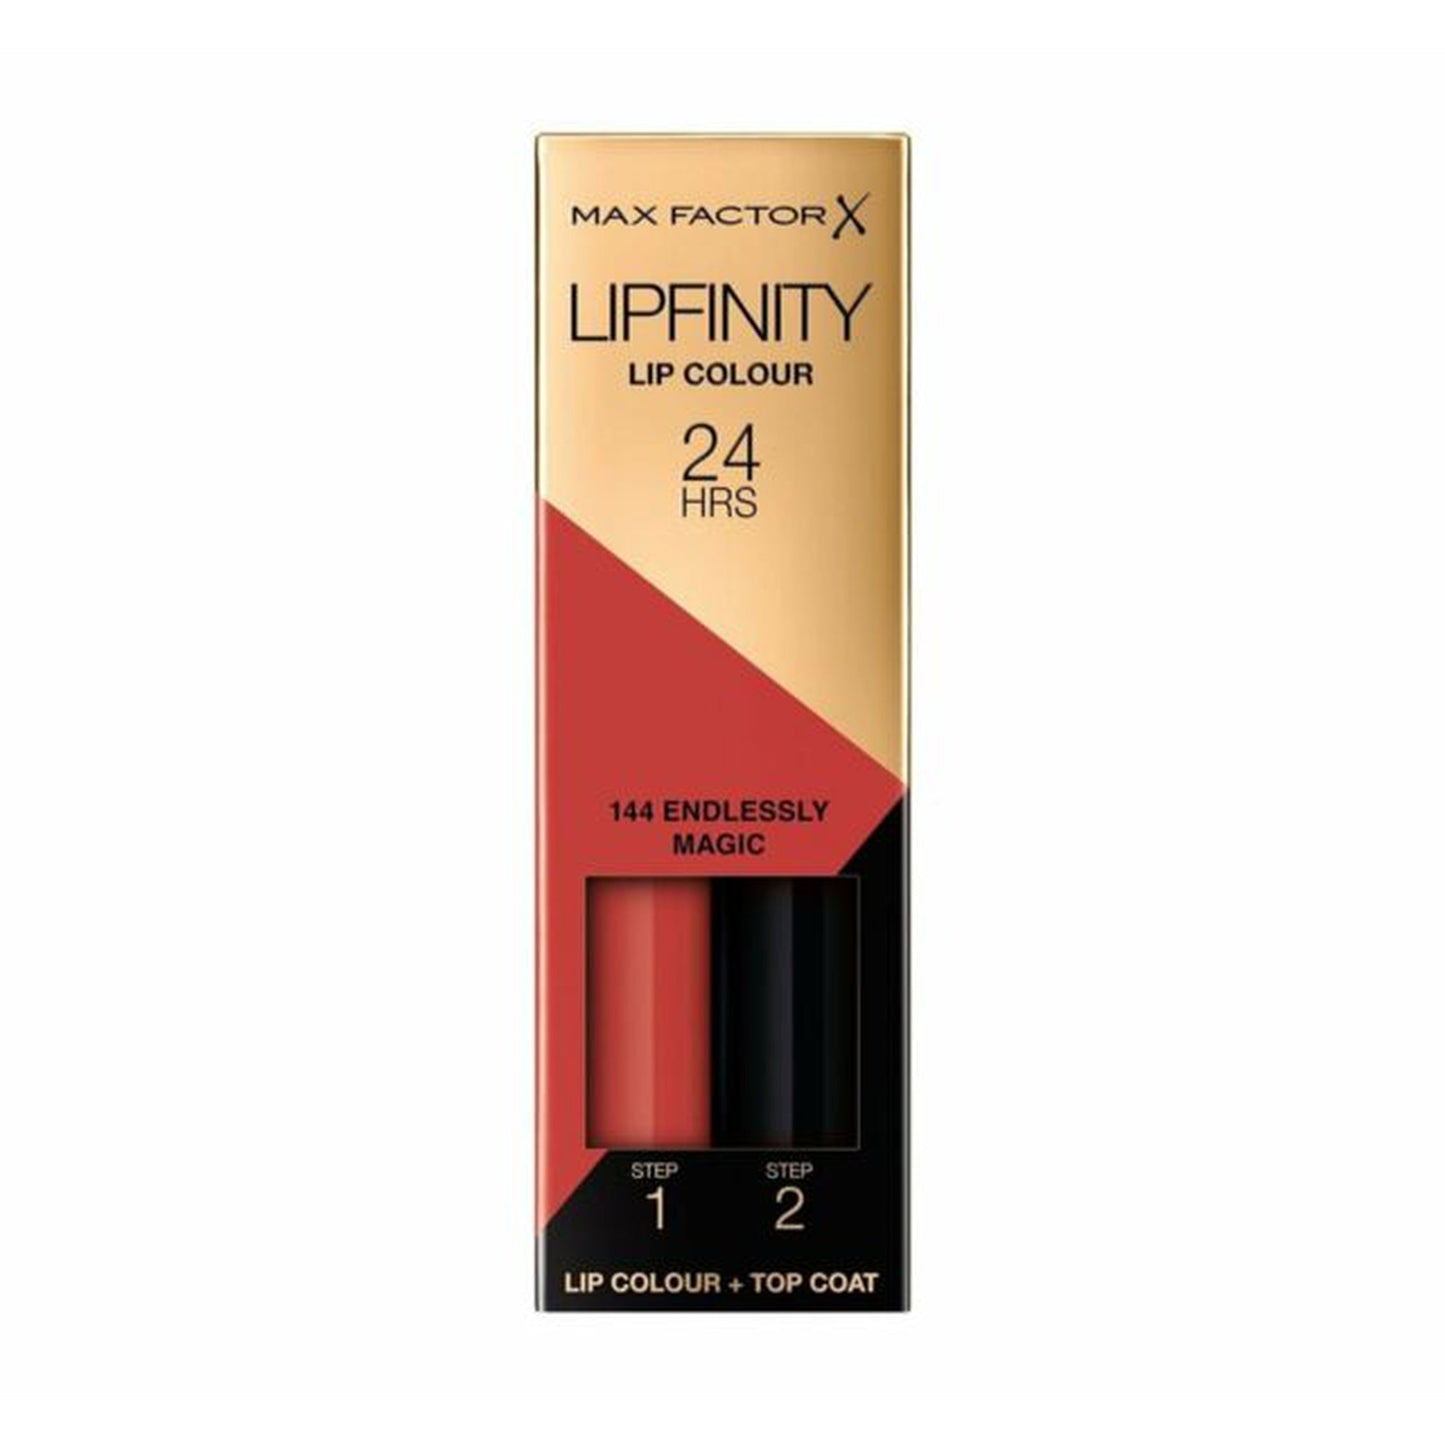 Max Factor Lipfinity Long-Lasting Two Step Lipstick - 144 Endlessly Magic-Max Factor-BeautyNmakeup.co.uk